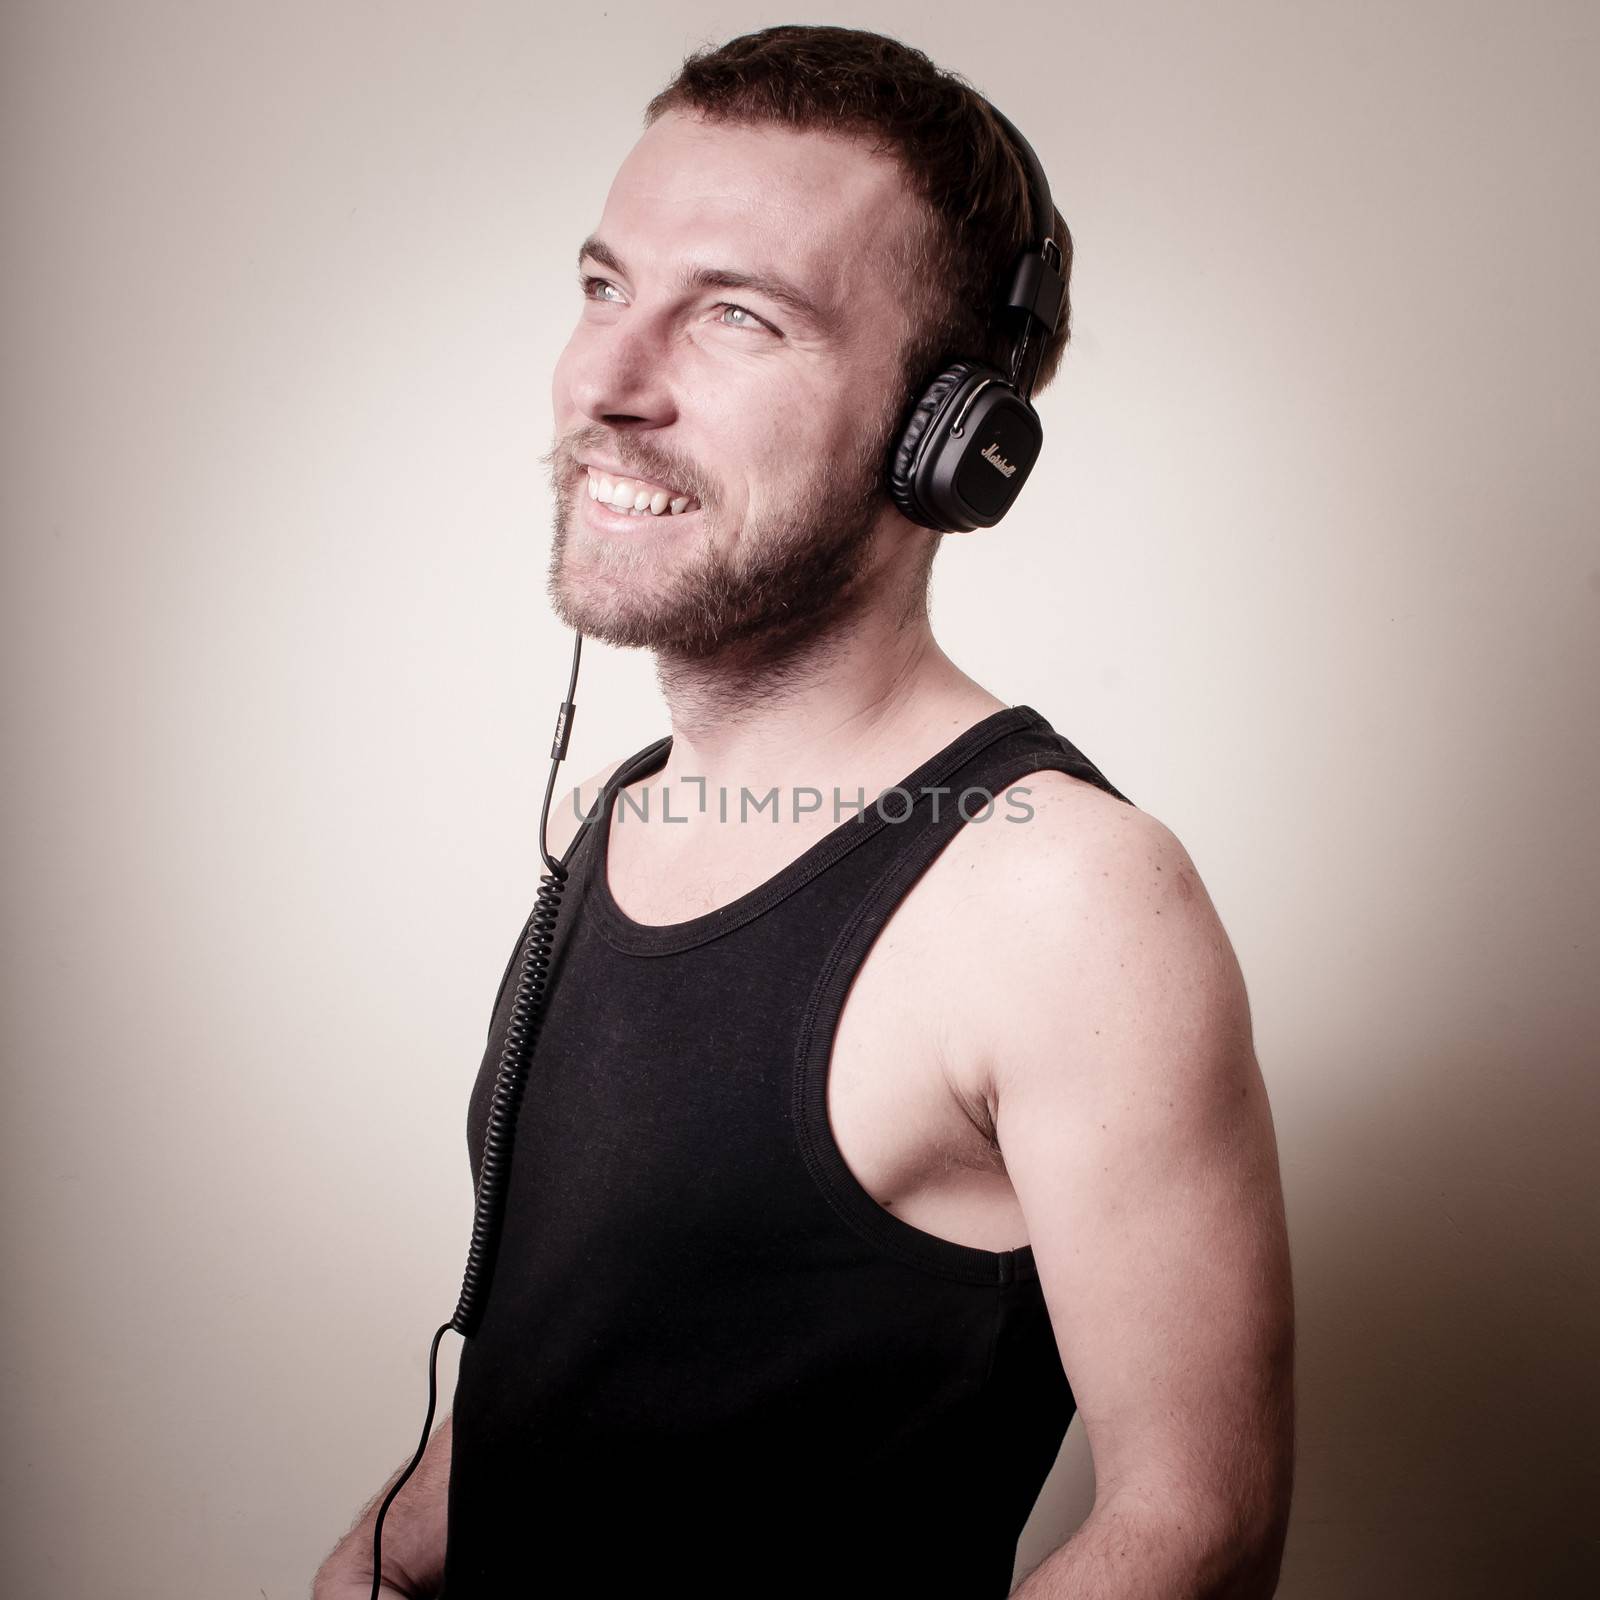 stylish hipster listening to music on gray background